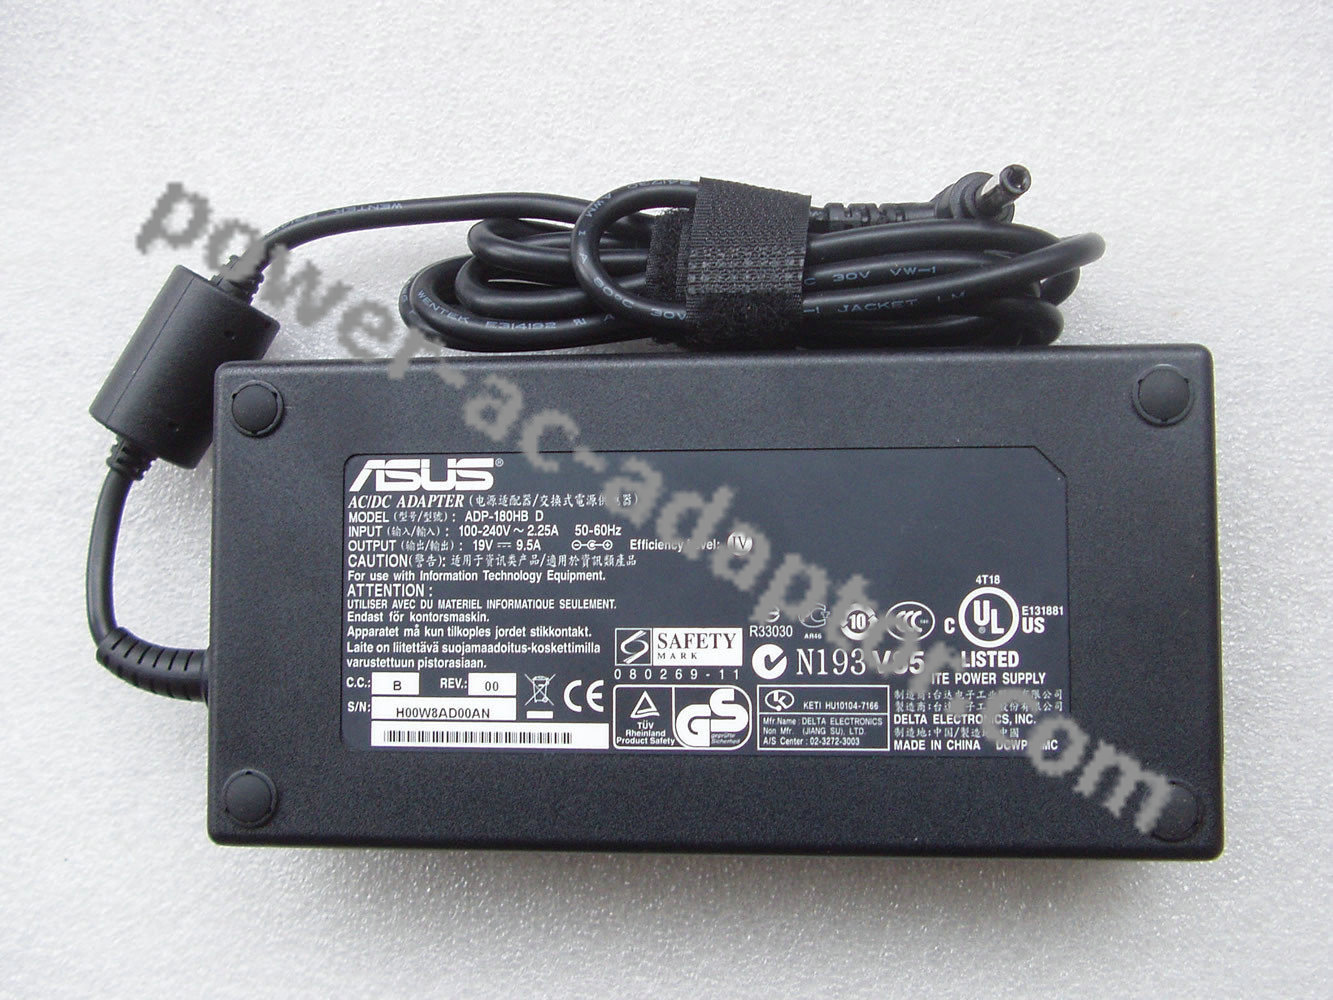 ASUS G55VW-DH71 G75VW-DS71 ADP-180HB N180W-02 Adapter